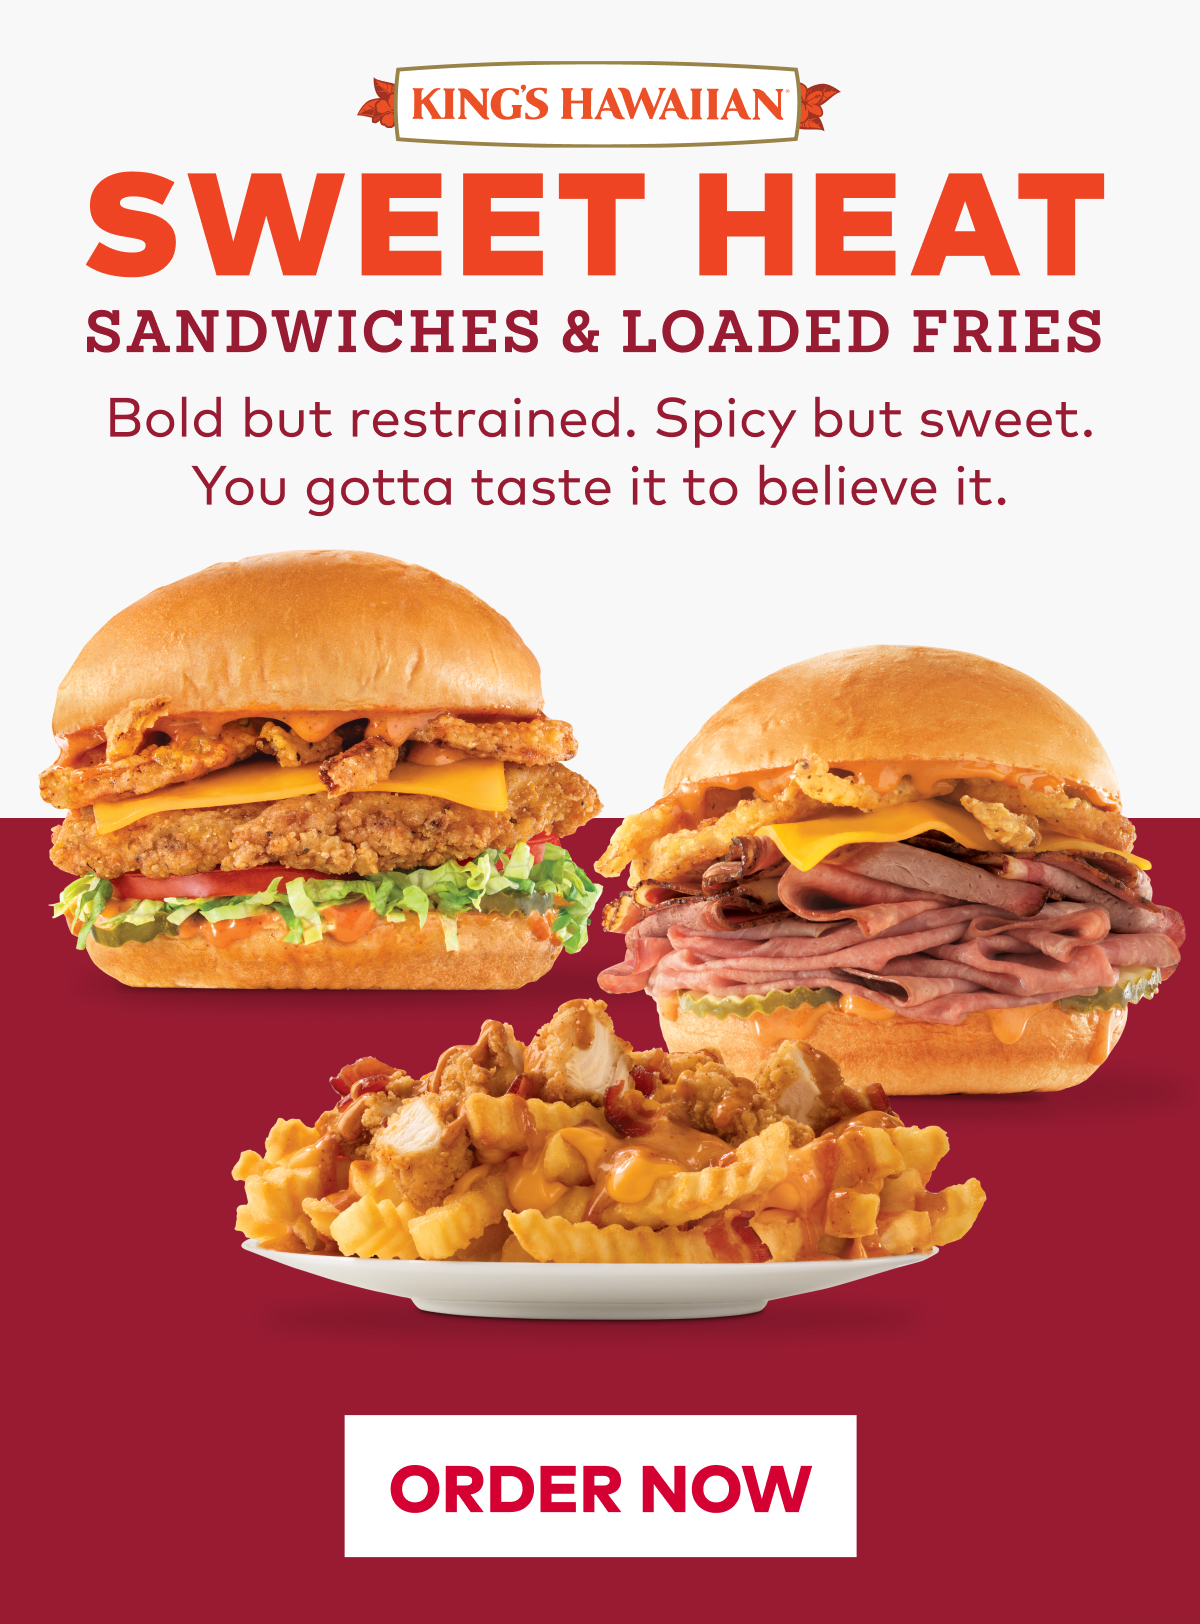 Arby's King's Hawaiian Sweet Heat Sandwiches and Loaded Fries